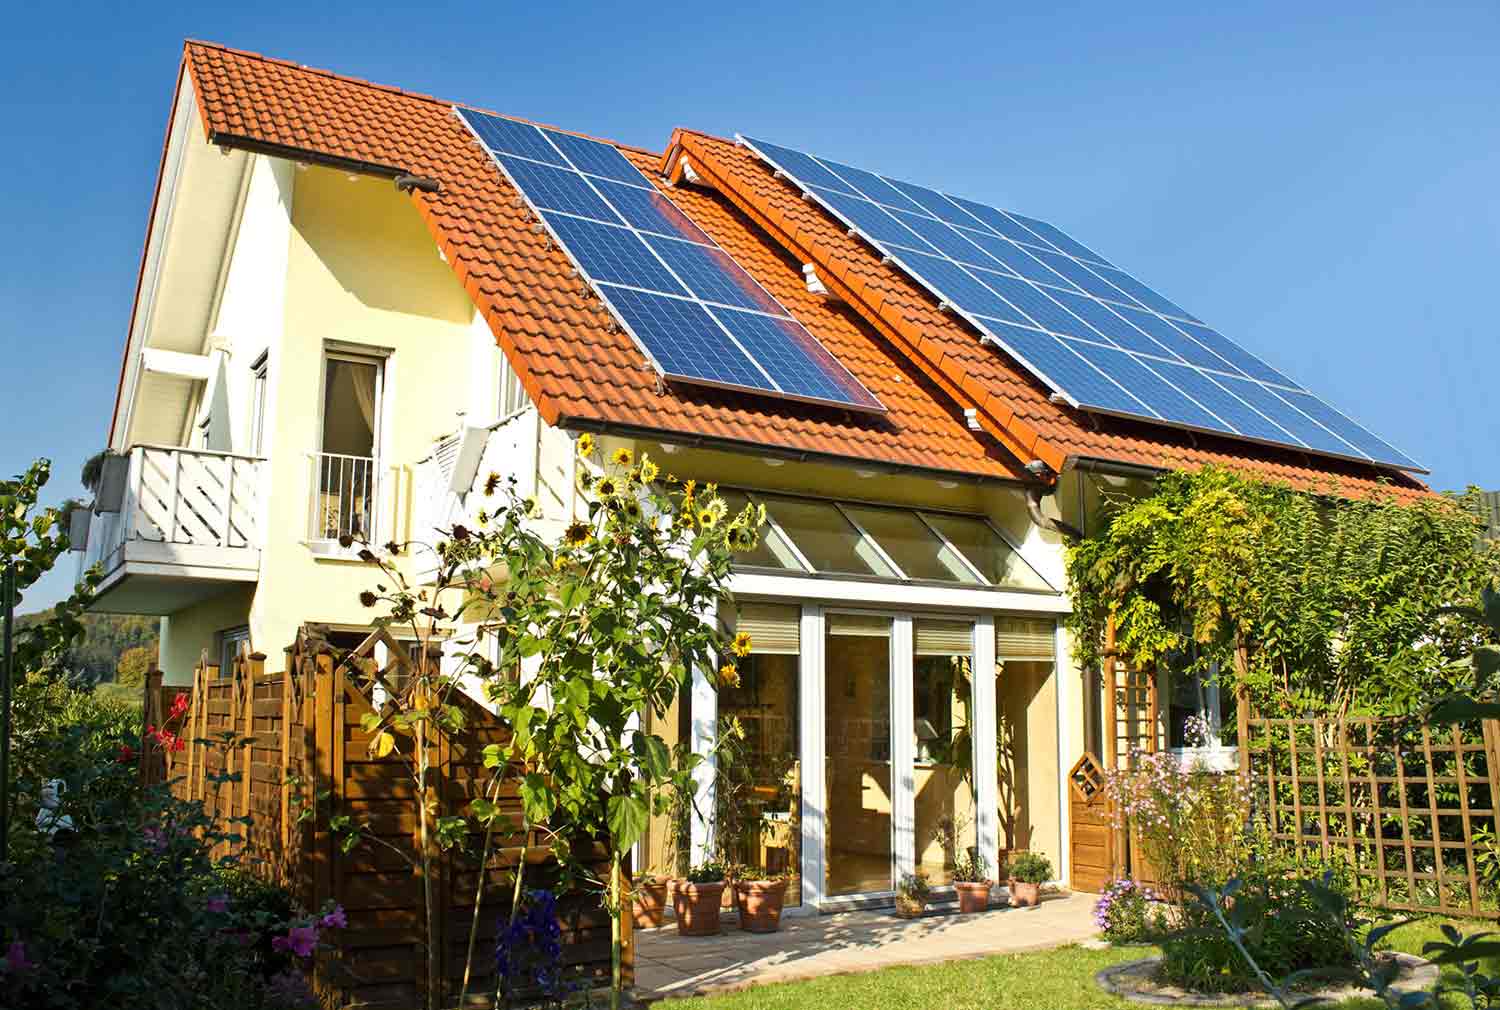 A single-family home with solar panels on the roof